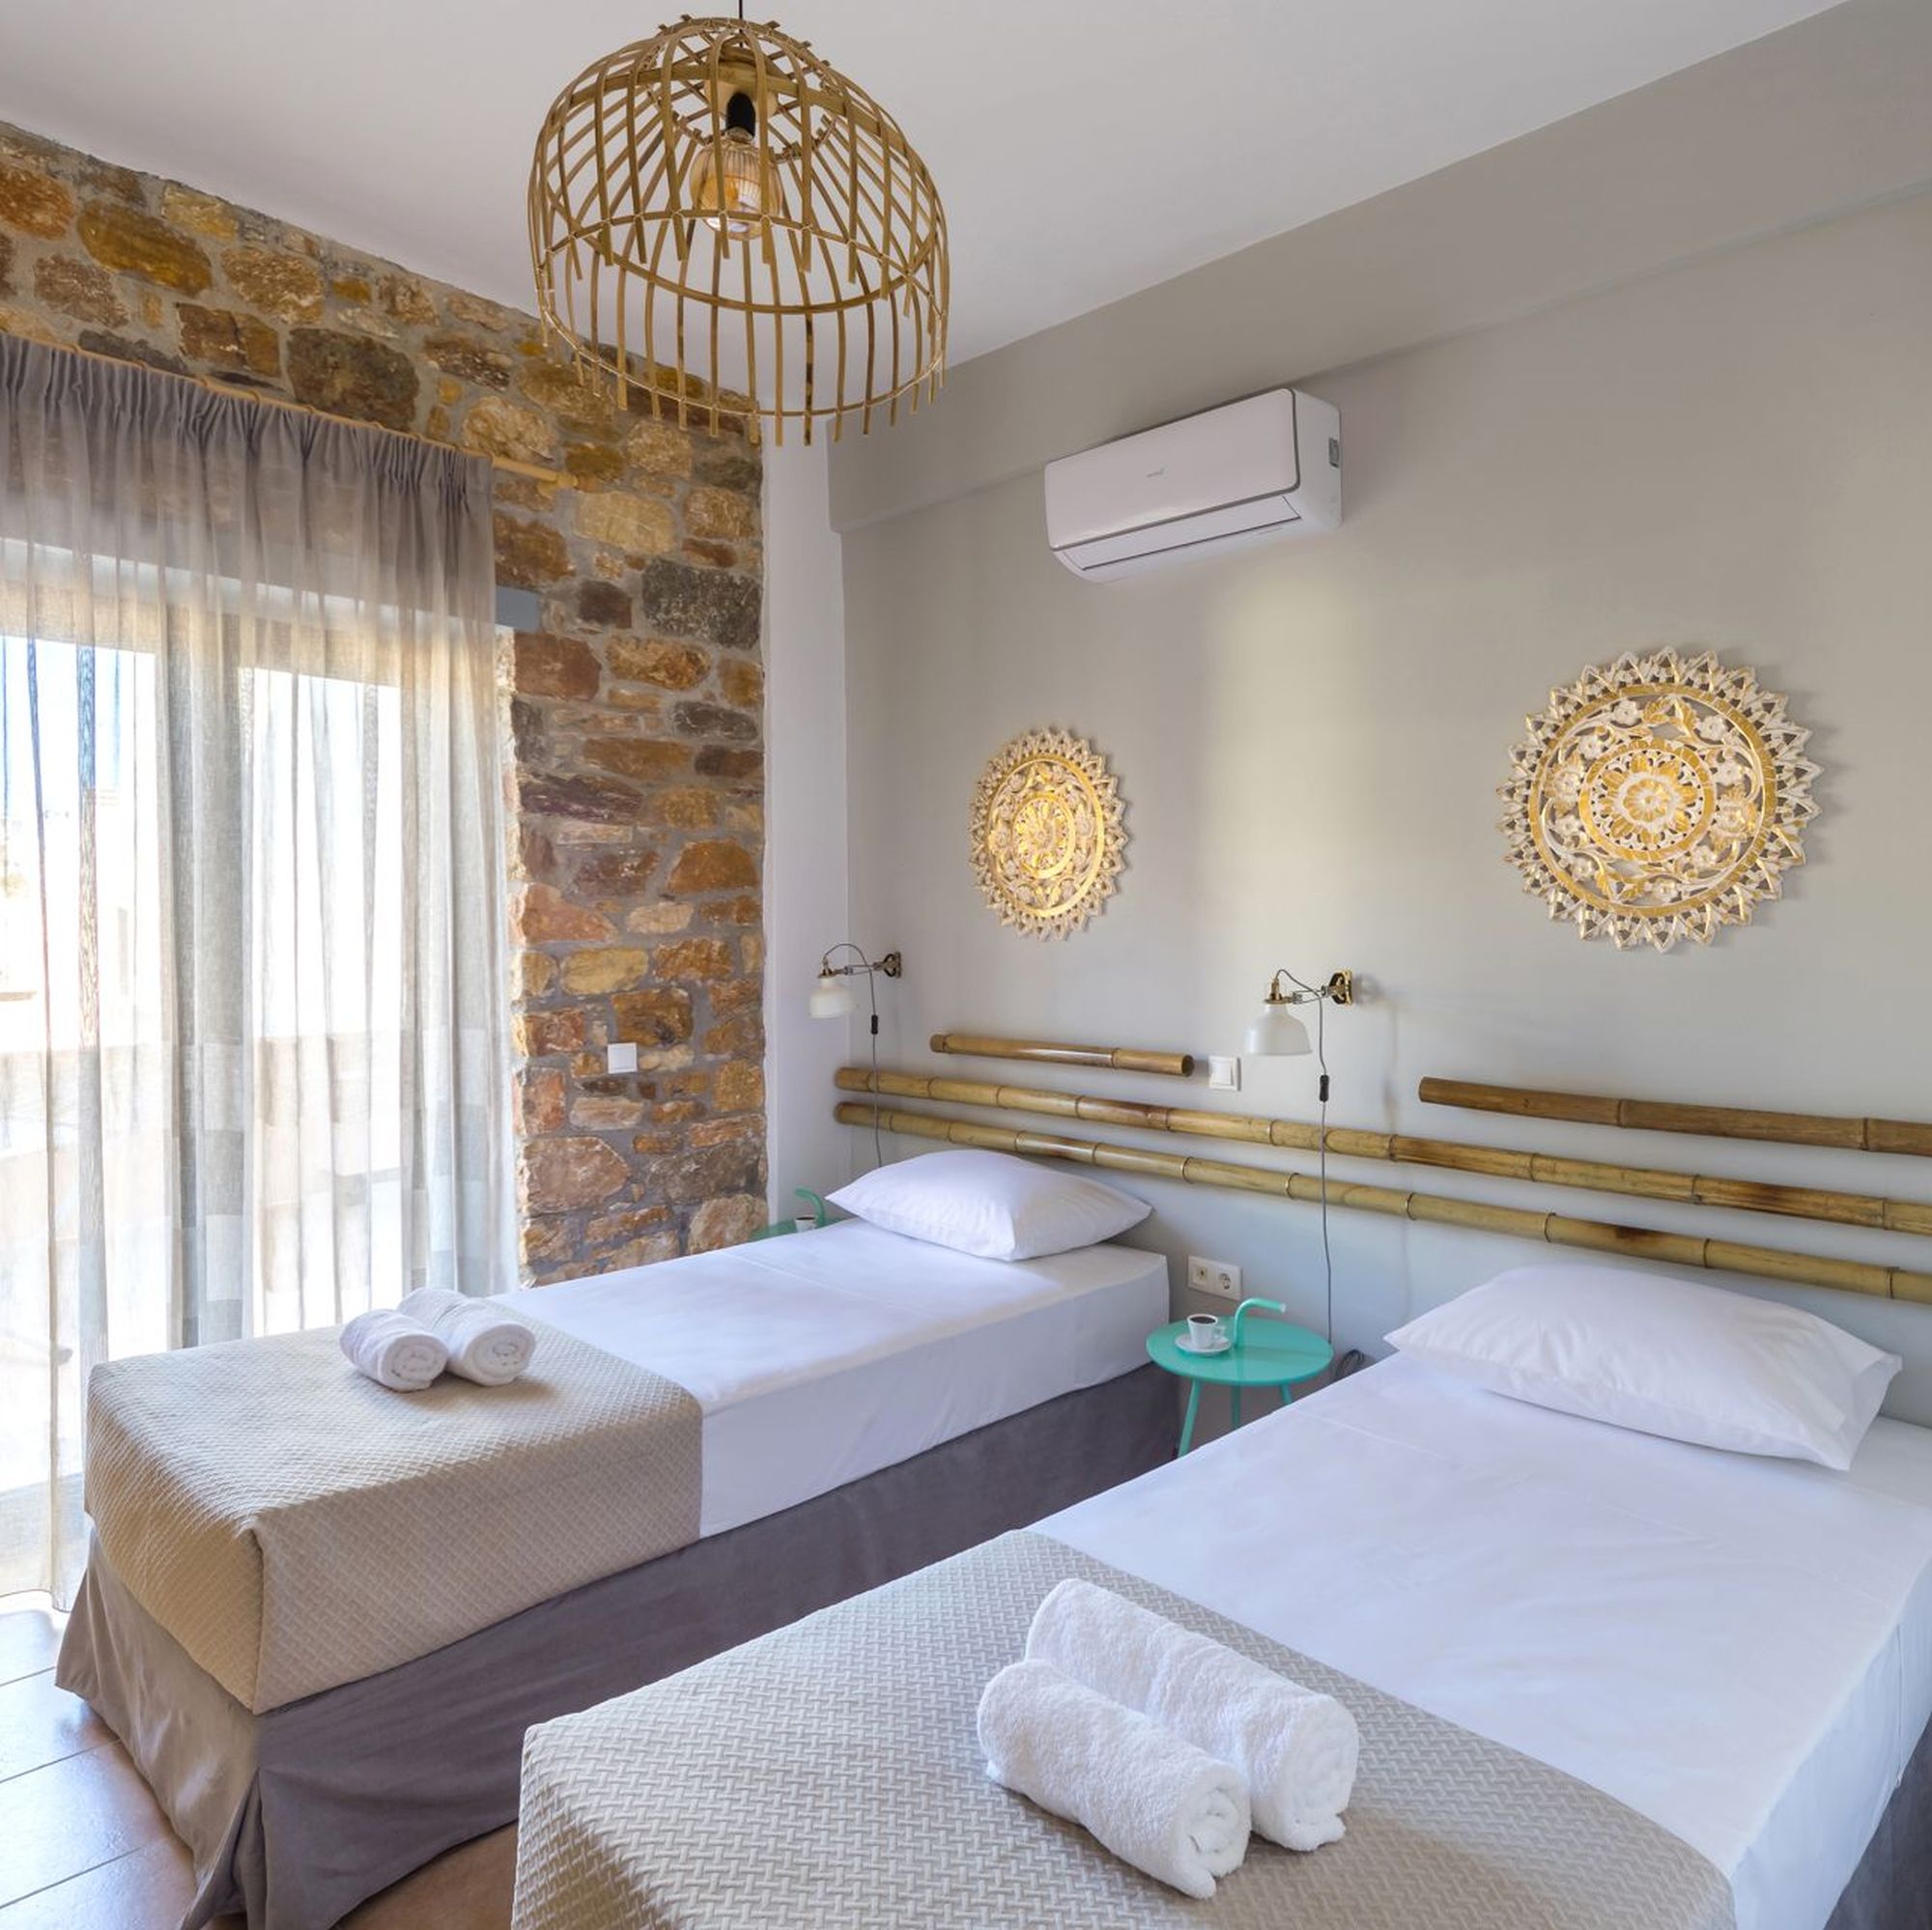 Twin bedroom of a stone built Syra Suite residence, blue bedside tables, white-gold wall lights, decorative masts and round gold metallic decorative elements on the wall over the beds.